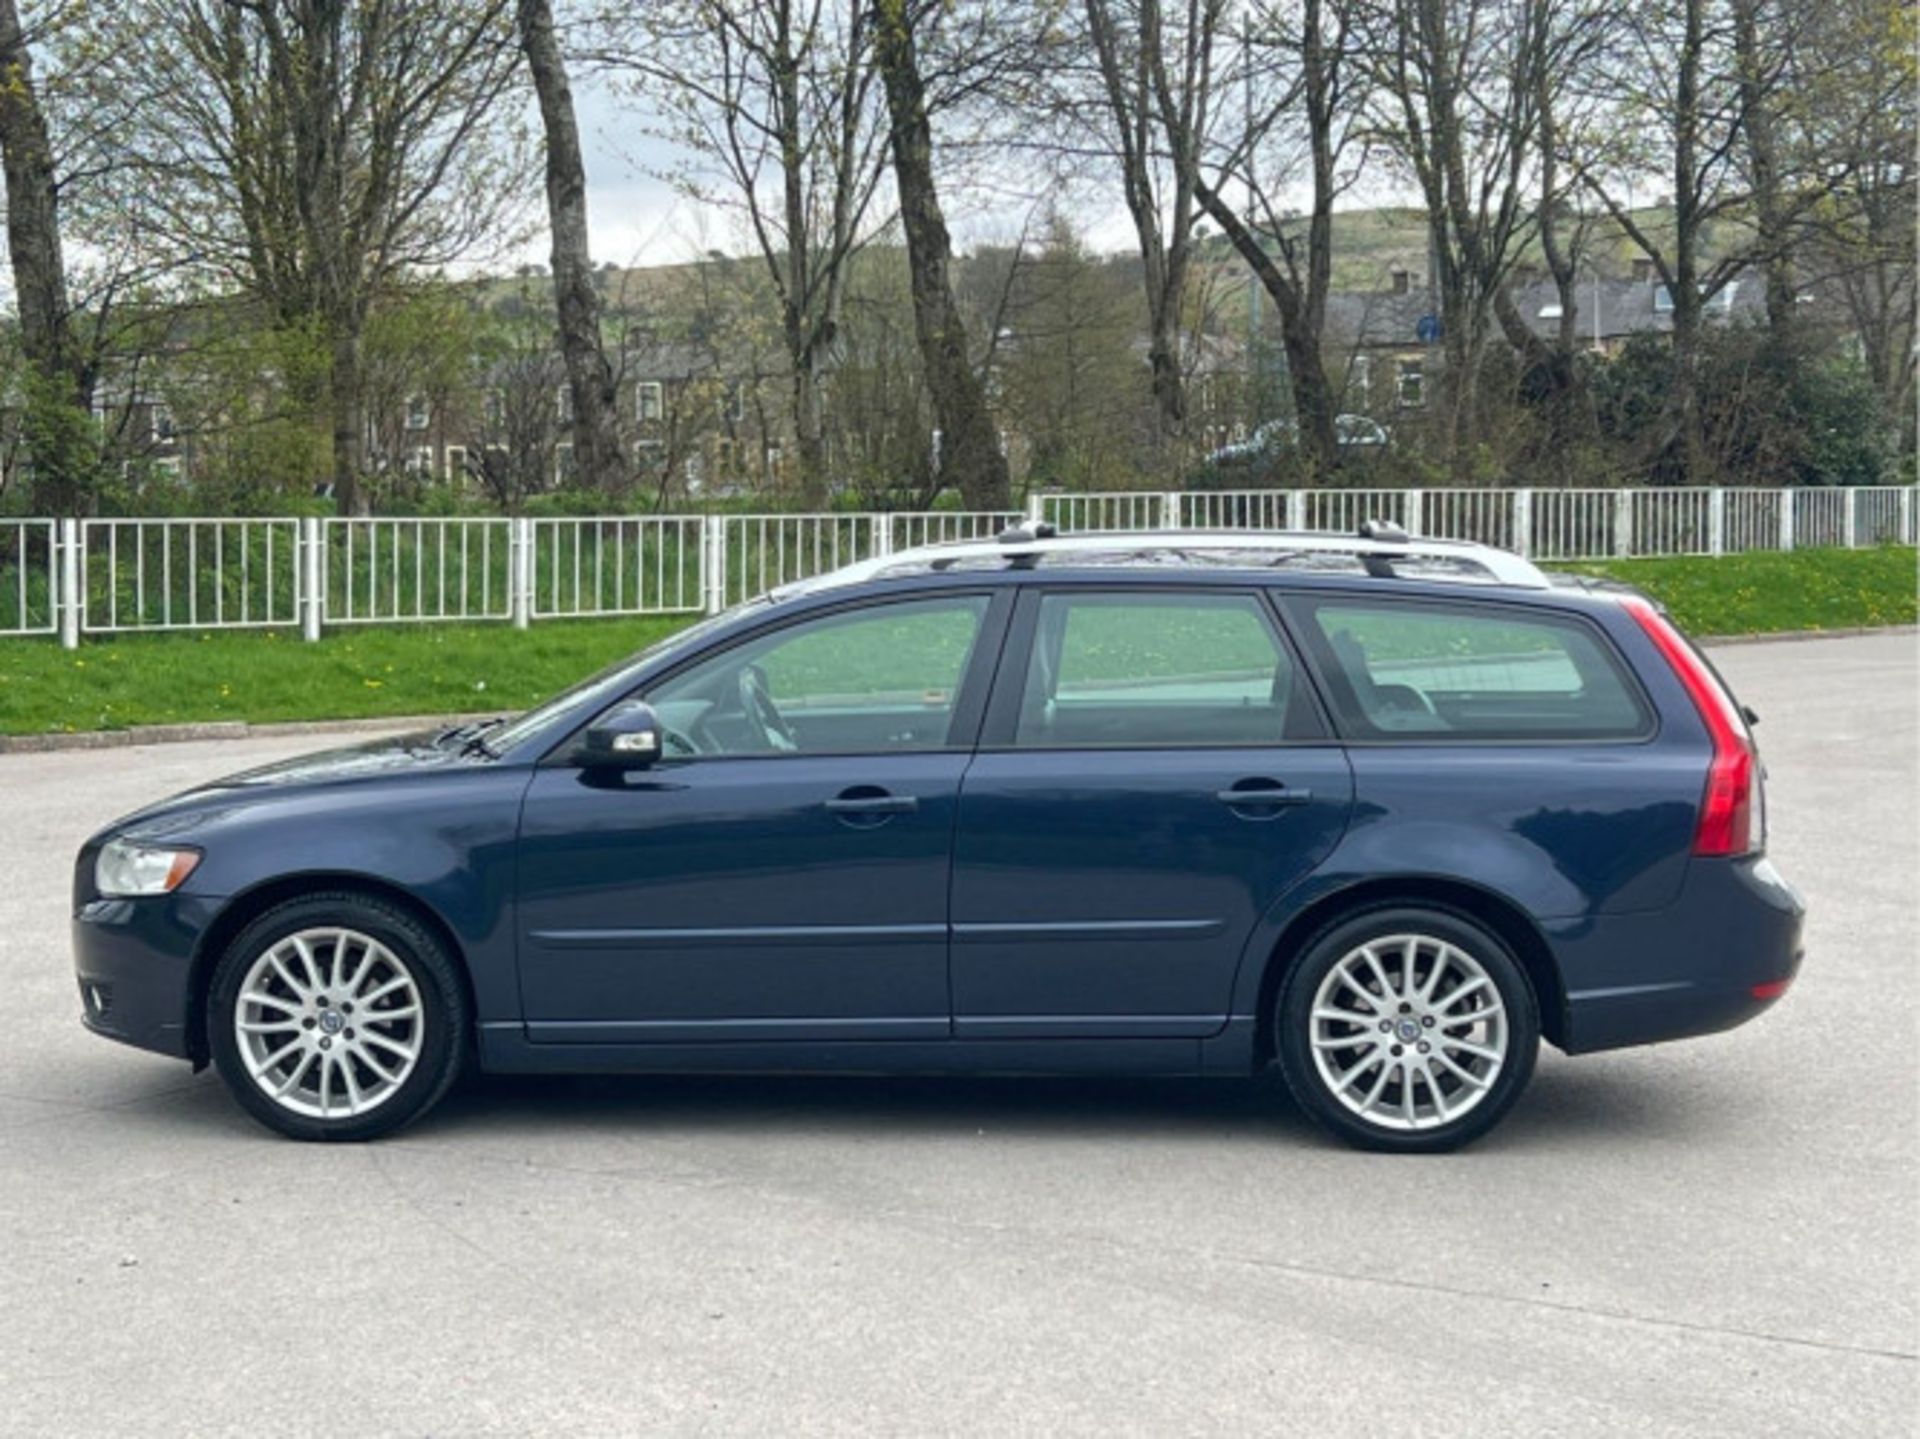 VOLVO V50 1.6D DRIVE SE LUX EDITION EURO 5 (S/S) 5DR (2012) - Image 78 of 88